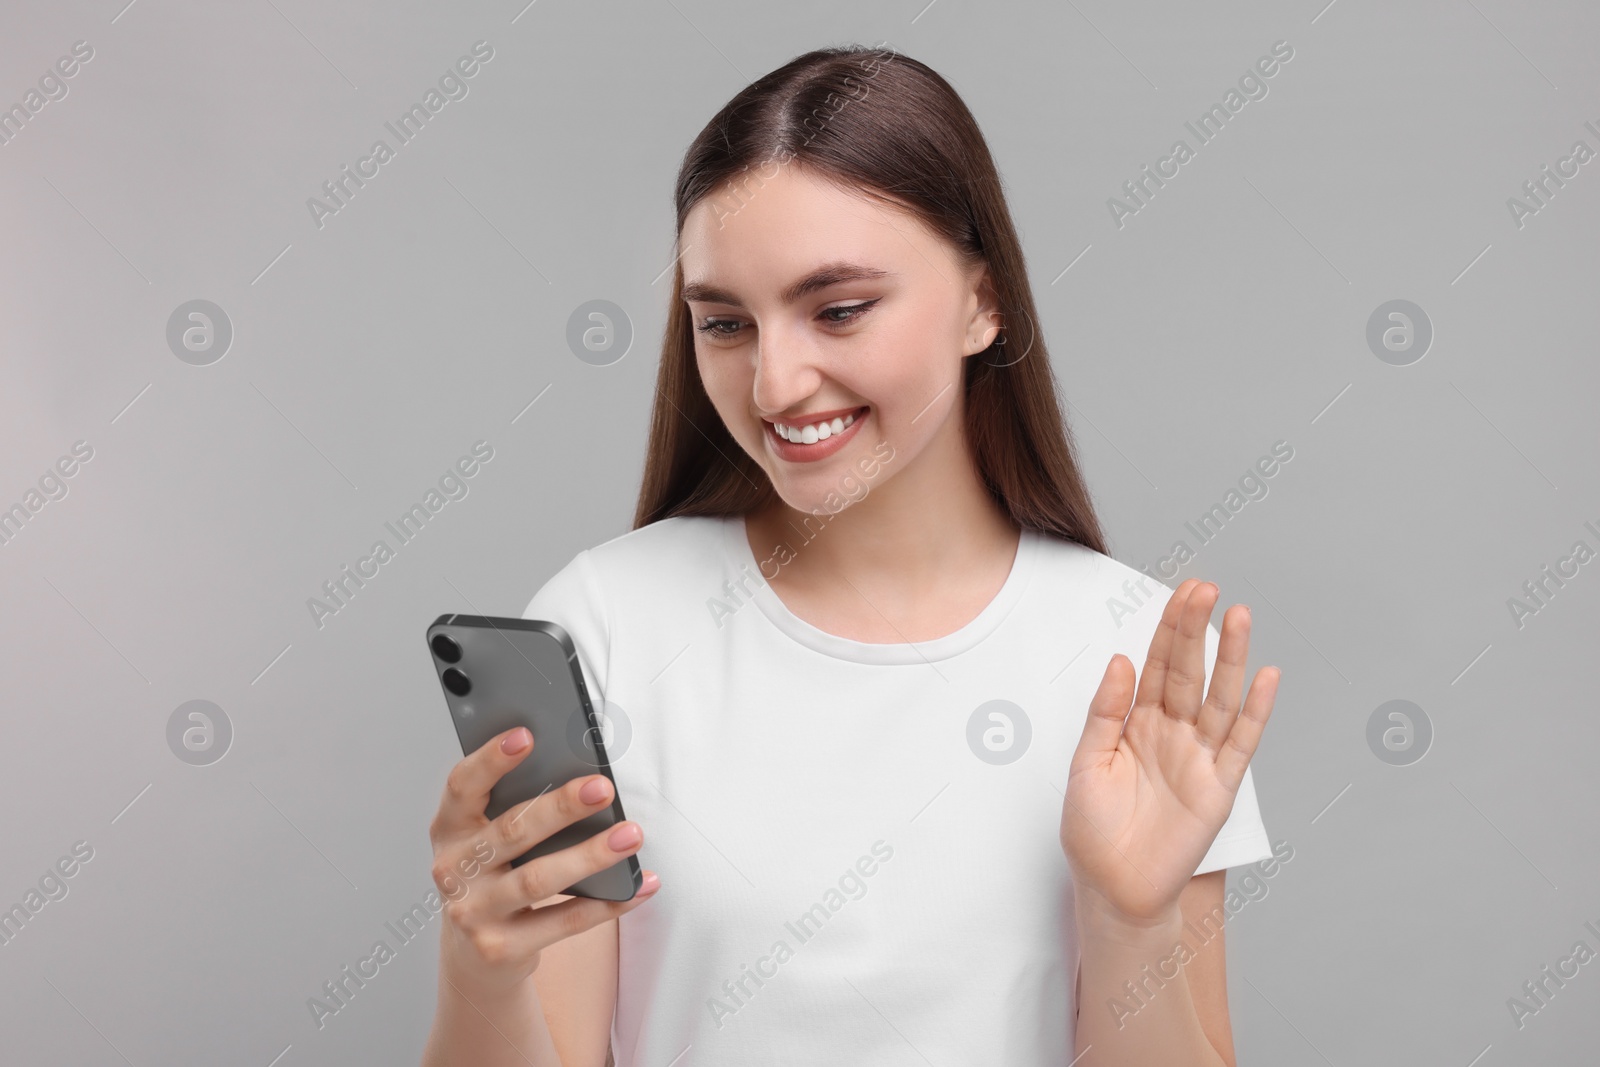 Photo of Smiling woman having videochat by smartphone on light grey background